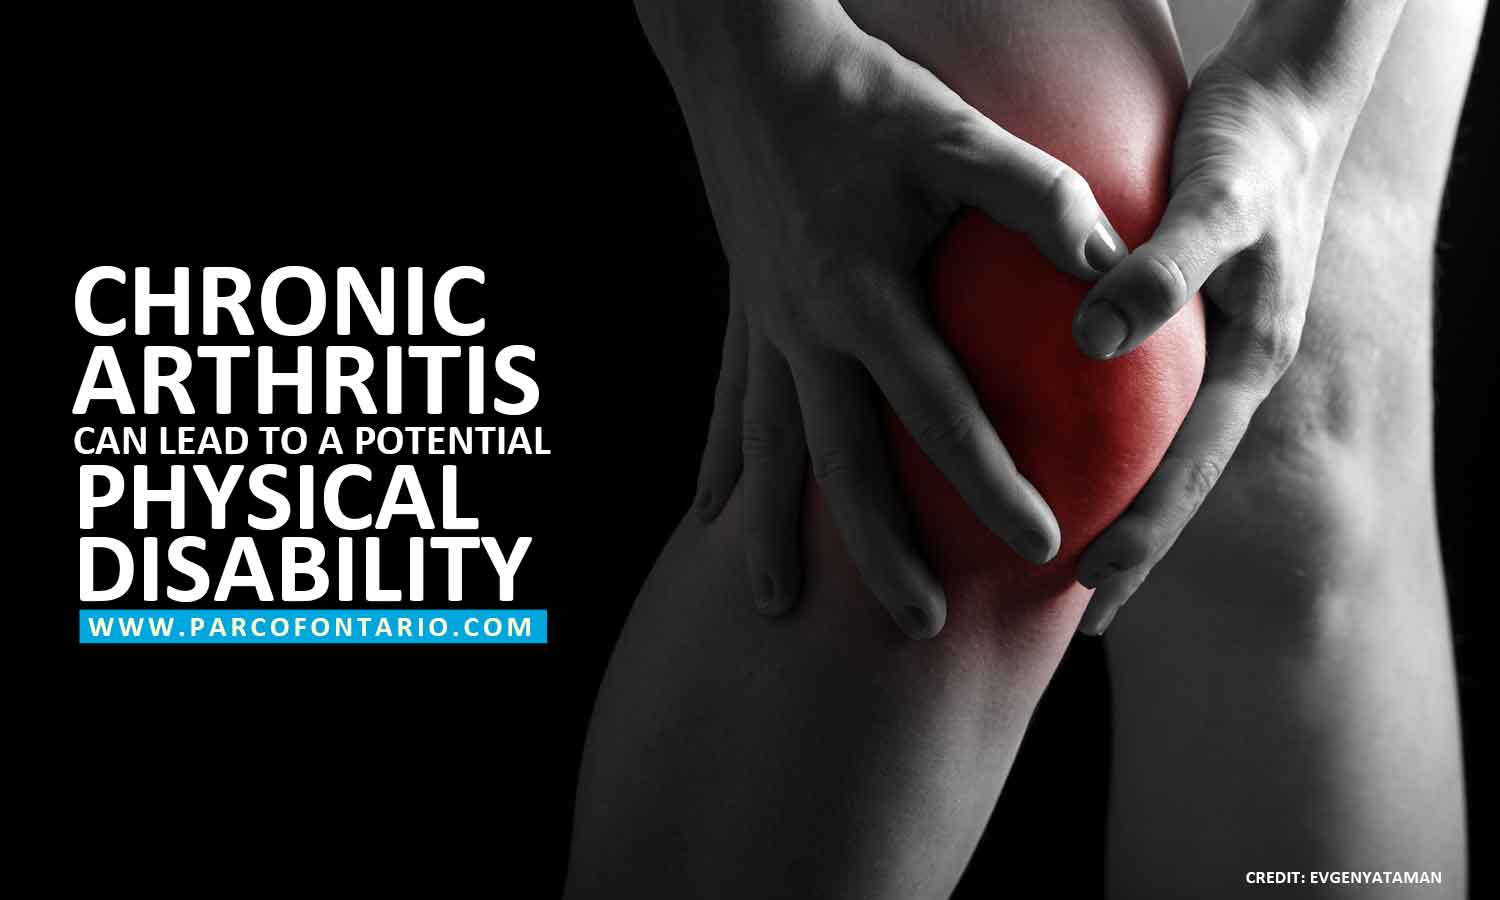 Chronic arthritis can lead to a potential physical disability